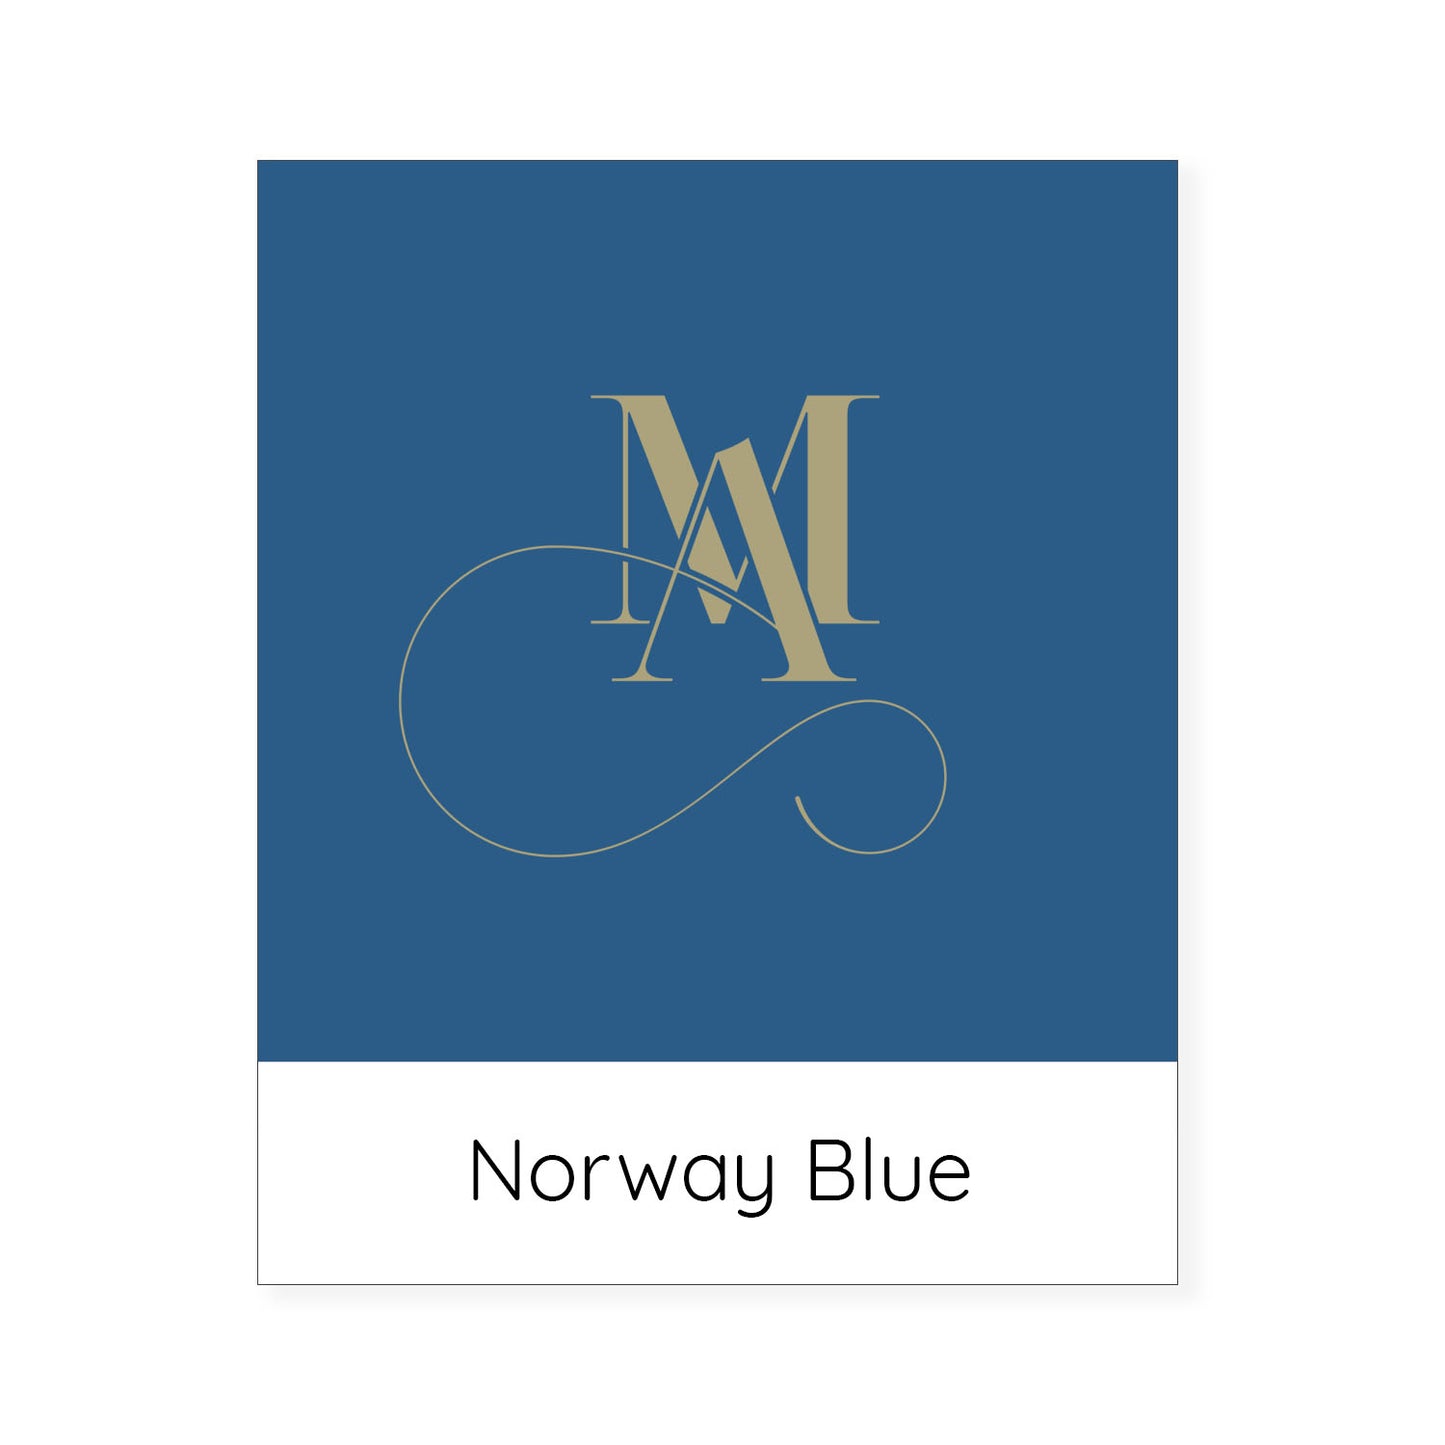 Norway blue cushion cover